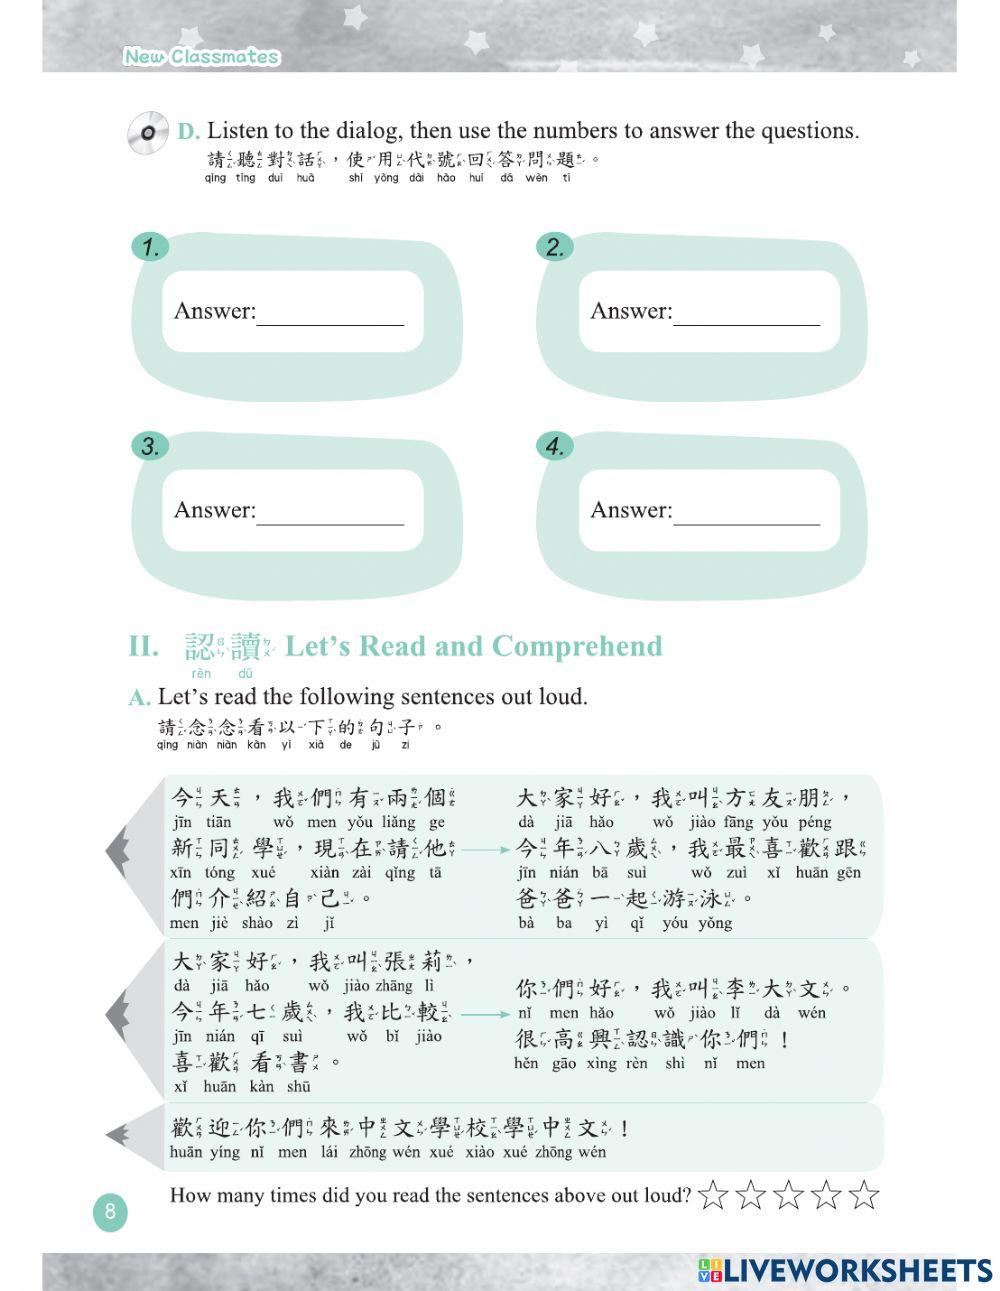 Let's Learn Chinese B2L1 WB Listening Comp